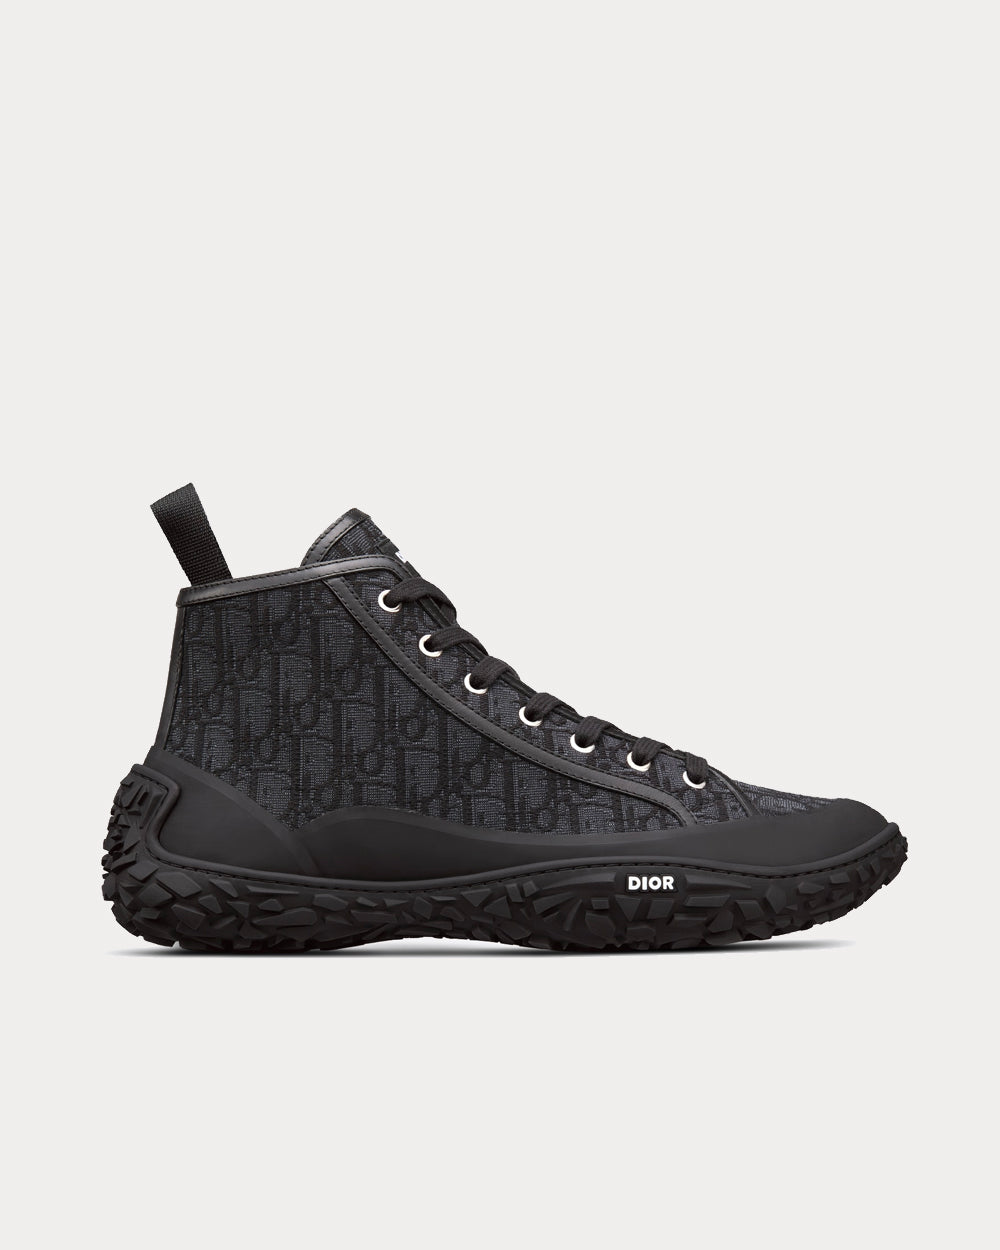 Dior - B28 Black Dior Oblique Jacquard and Rubber High Top Sneakers